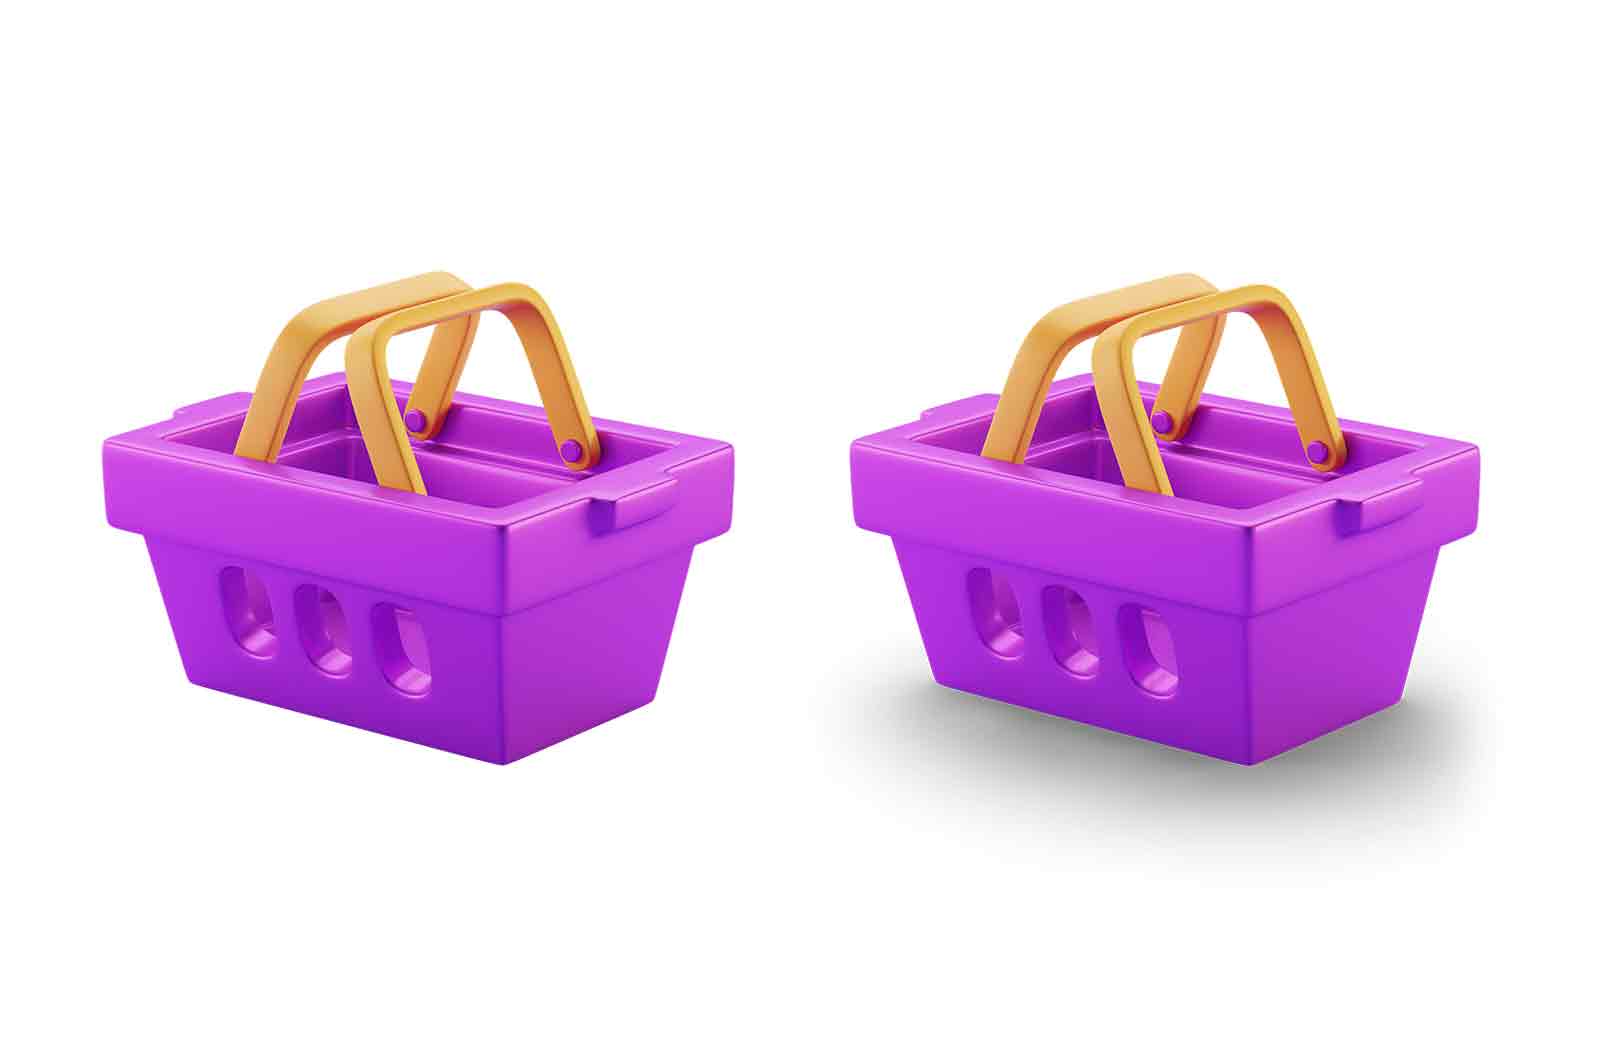 Empty purple shopping cart 3d rendered icon illustration. Grocery or food cart, trolley or buggy for use by customers. Shopping time